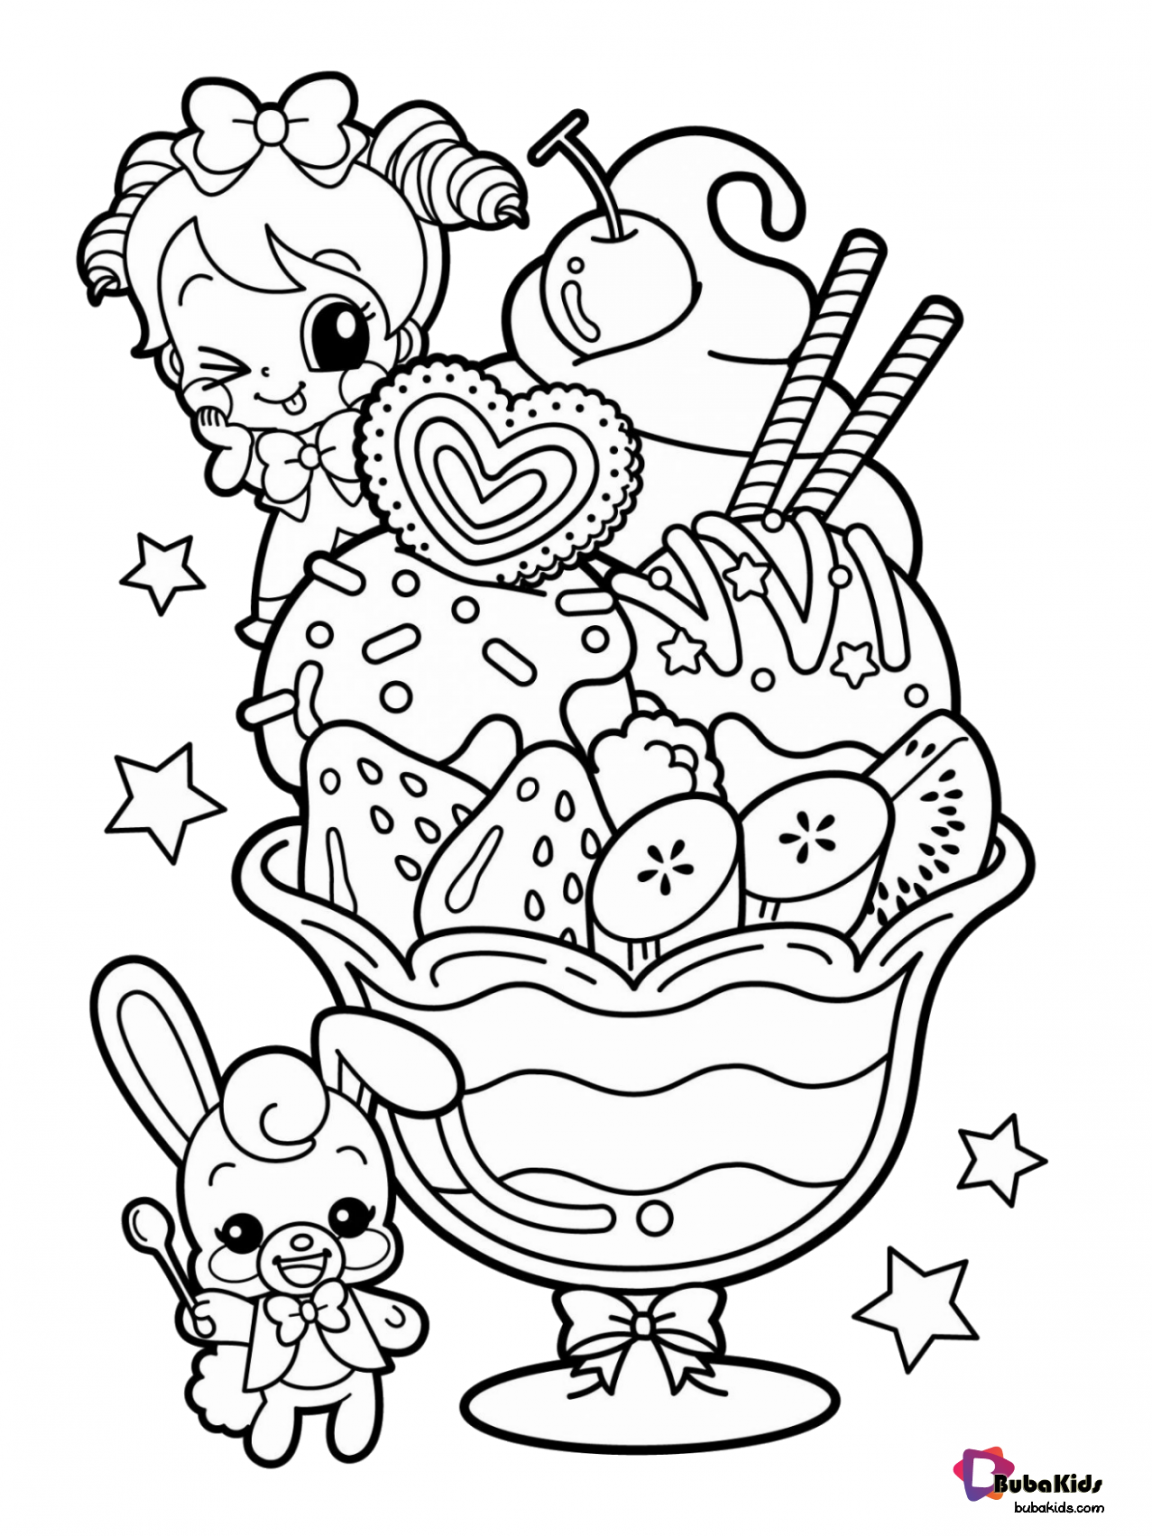 Coloring Pages Food Adult Drink Colouring Book Doodles Kids Books ...